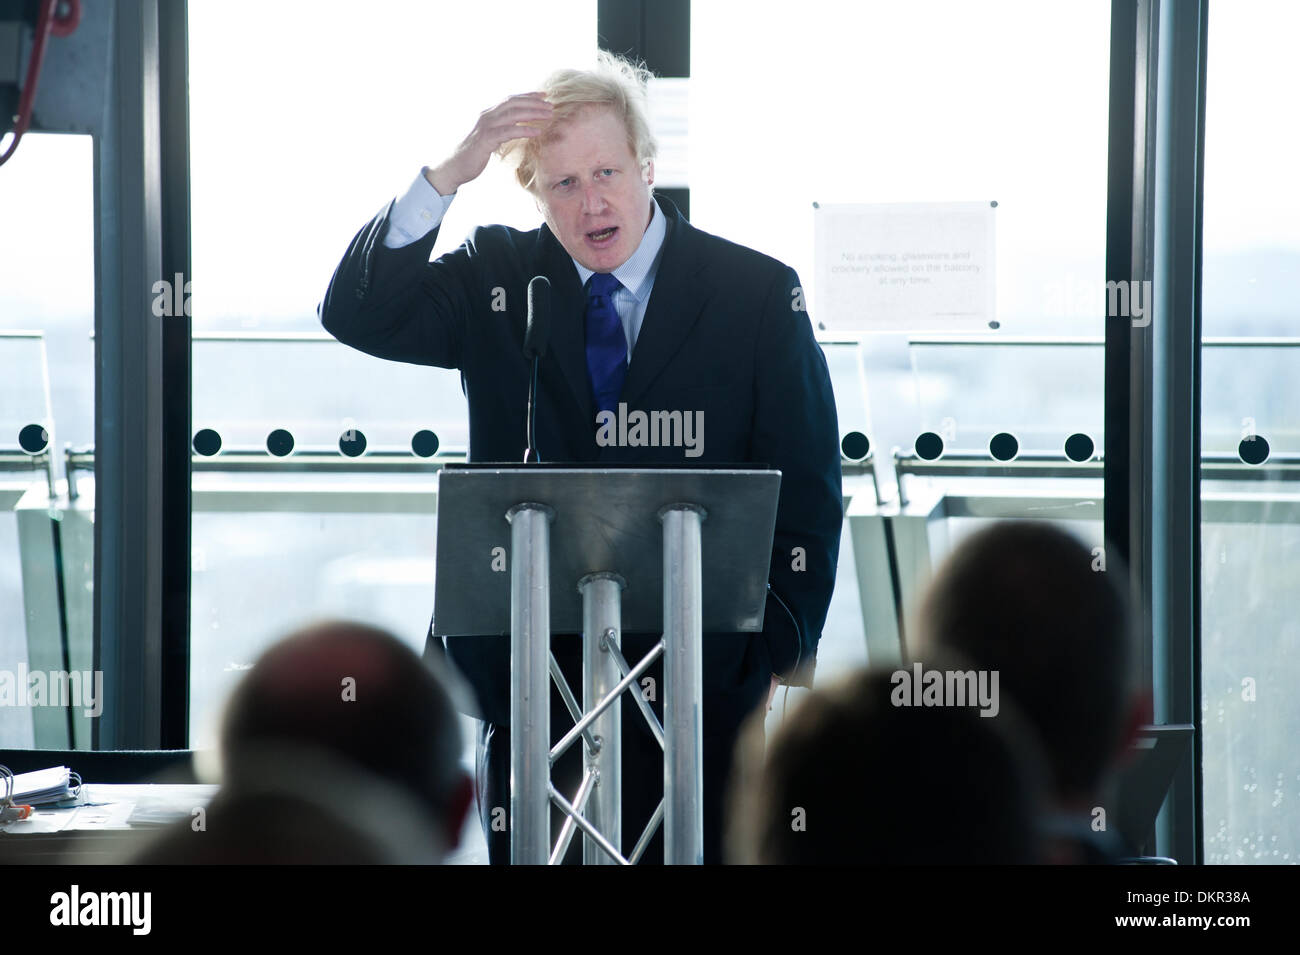 London, UK. 9th Dec, 2013. The Mayor of London, Boris Johnson, gives a keynote speech during an HGV/cycle safety event at City Hall attended by construction and transport trade associations, property developers, contractors and vehicle manufacturers. Credit:  Piero Cruciatti/Alamy Live News Stock Photo